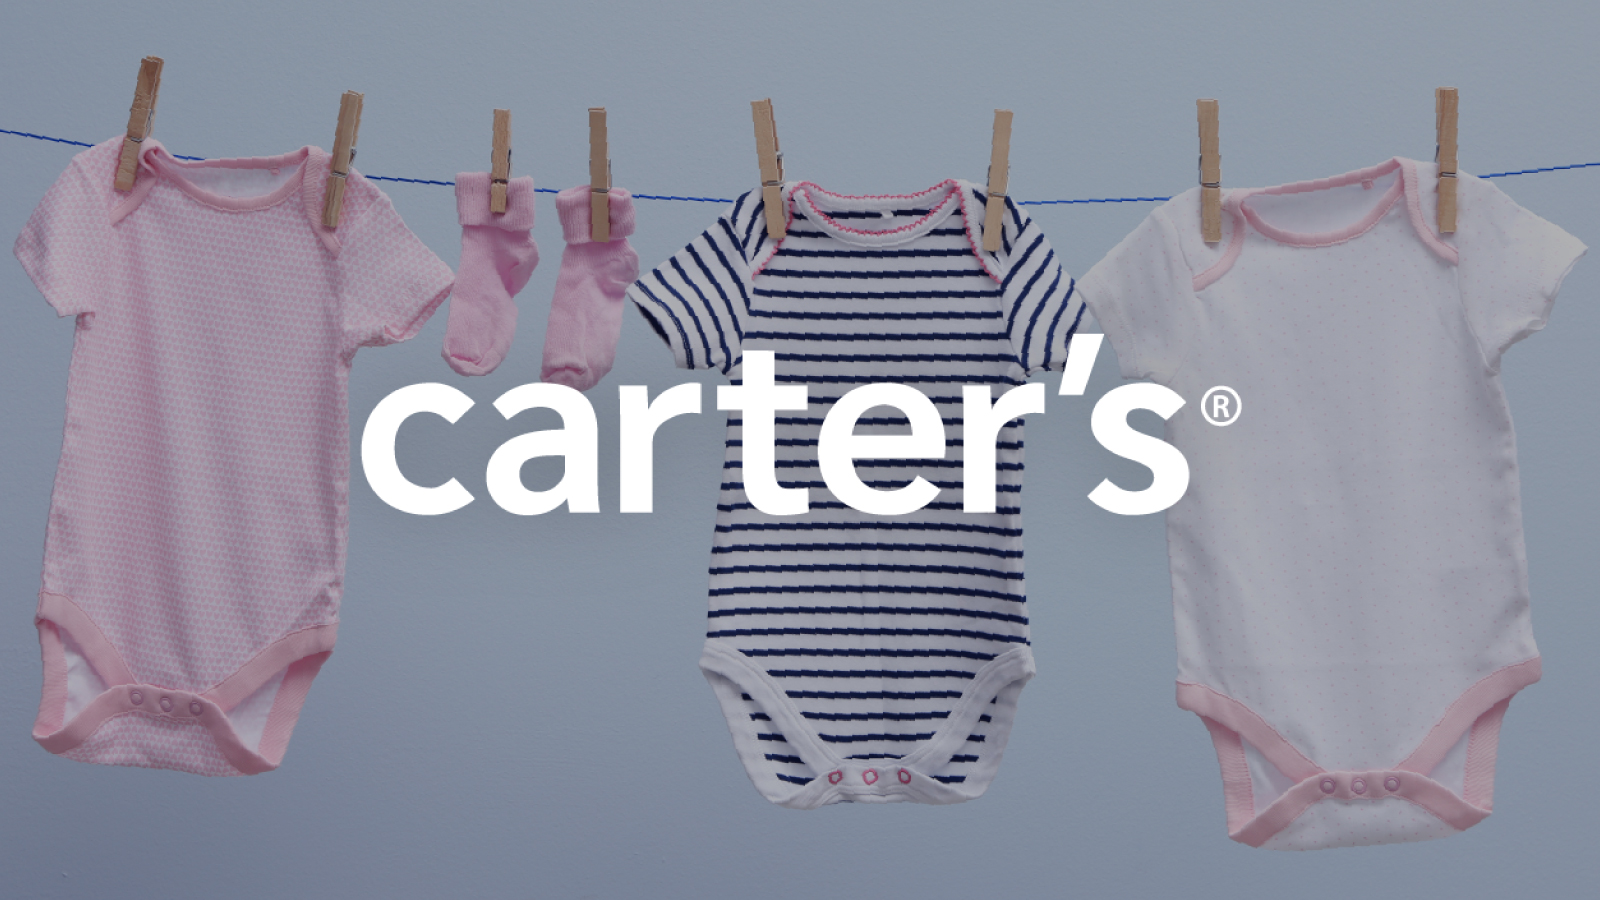 Carter's 社のロゴ